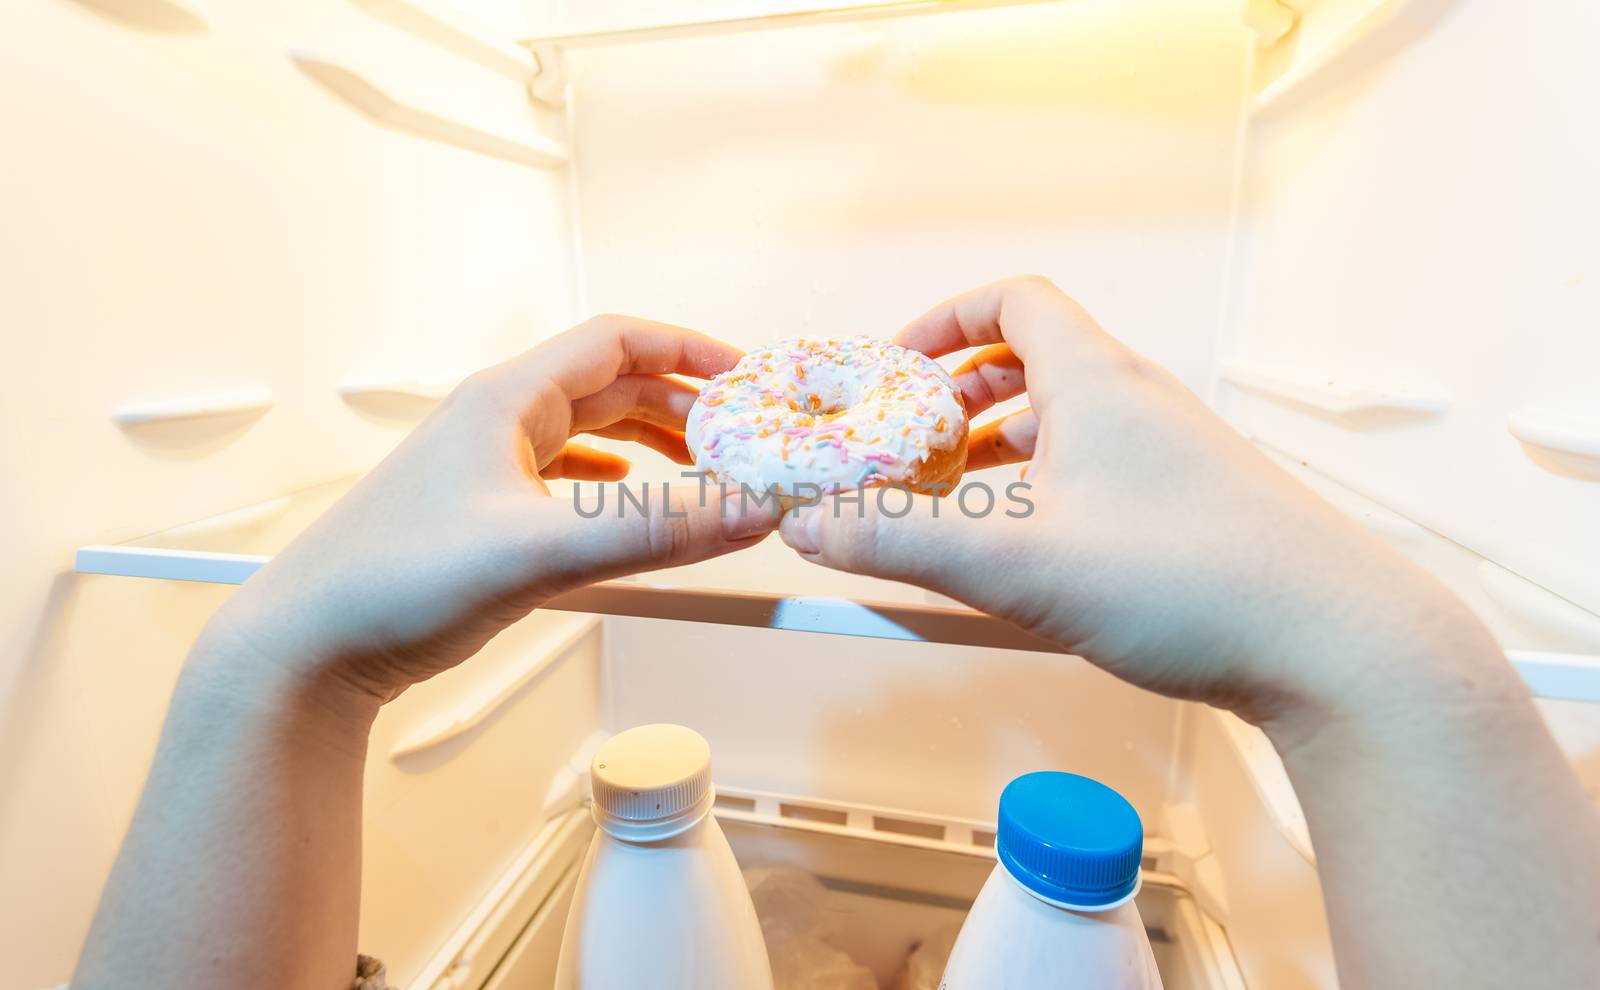 Closeup photo of female hand taking donut from refrigerator